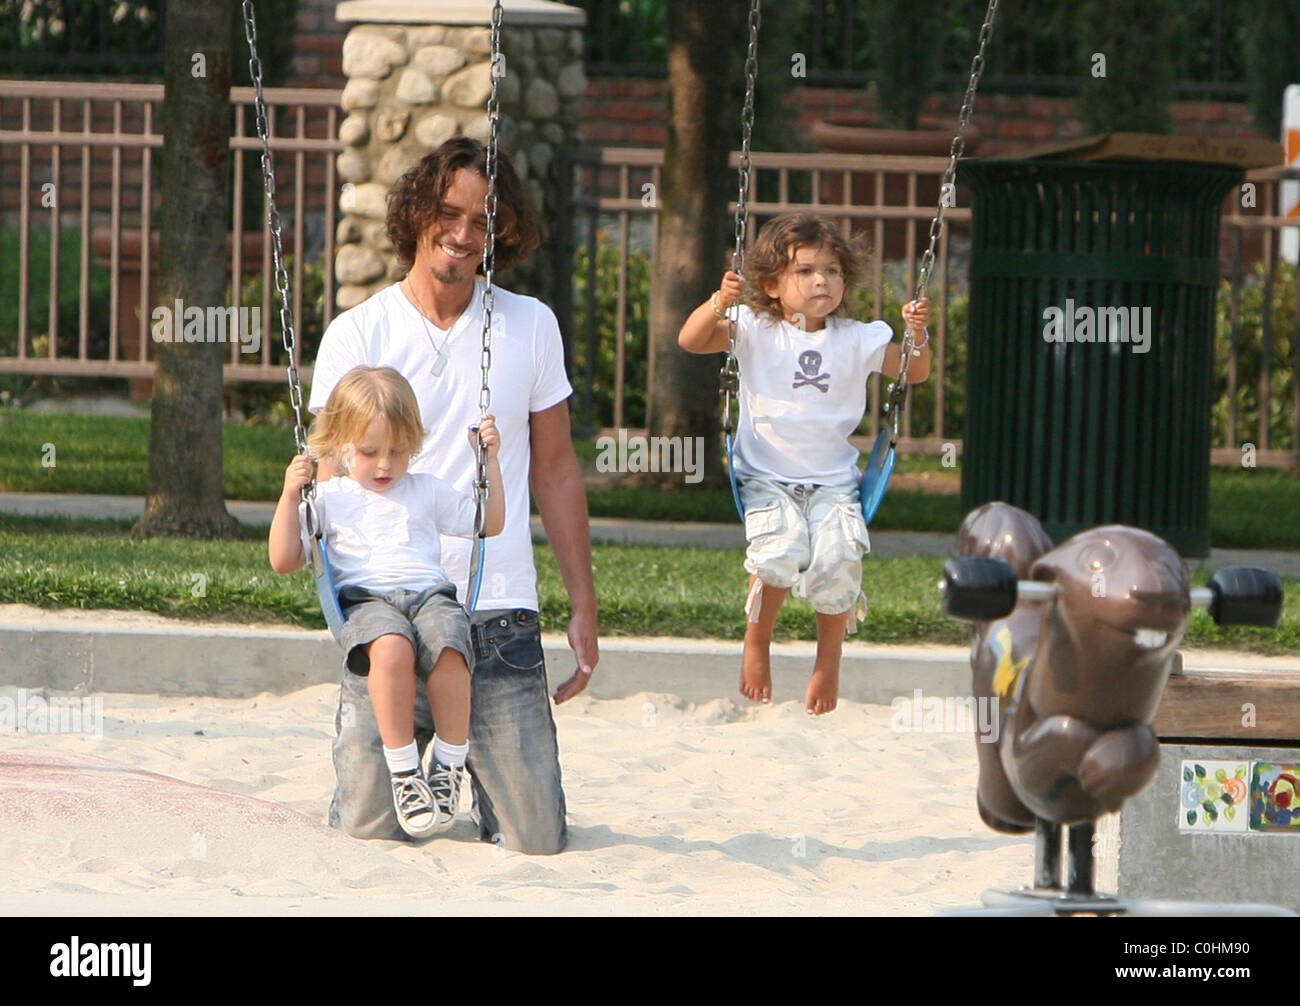 Chris Cornell, his son Christopher and daughter Toni playing on the swings as the musician spent some quality time with his two Stock Photo